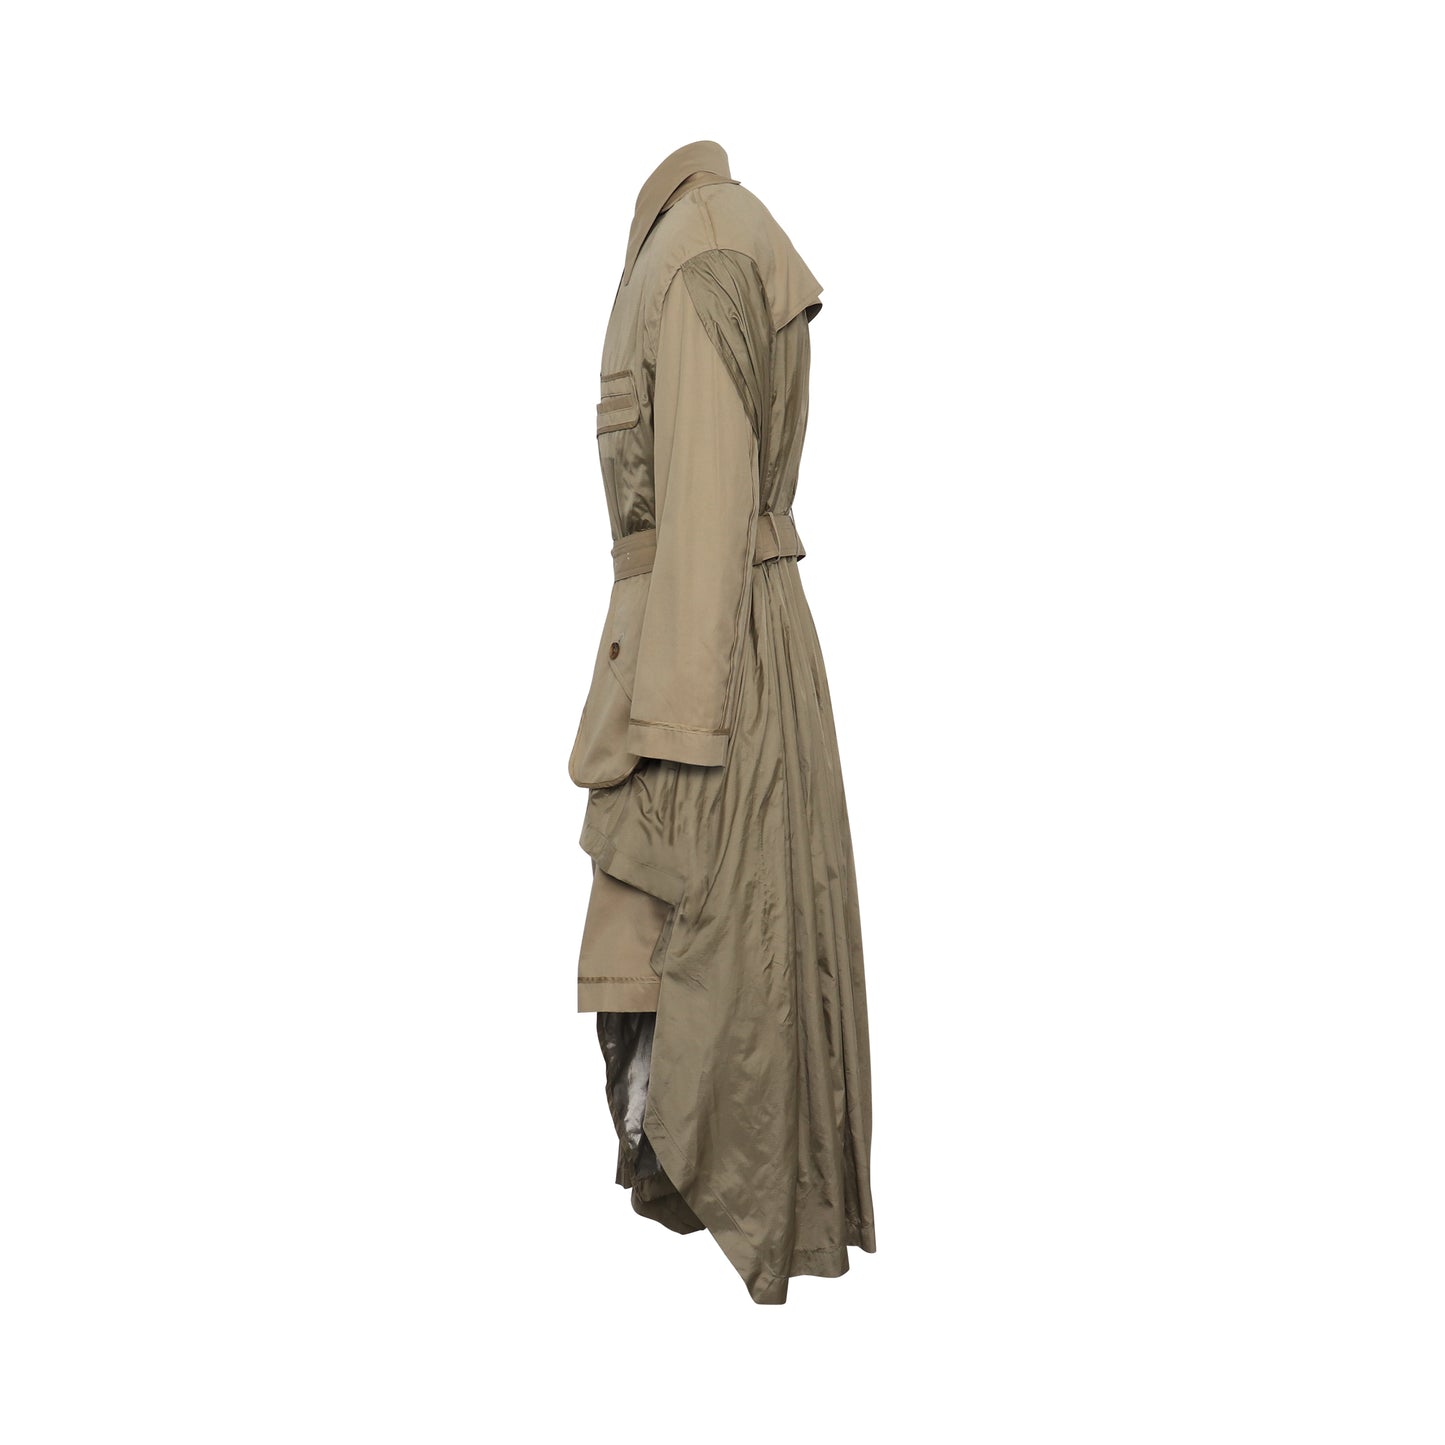 Inside-Out Trench Coat in Beige